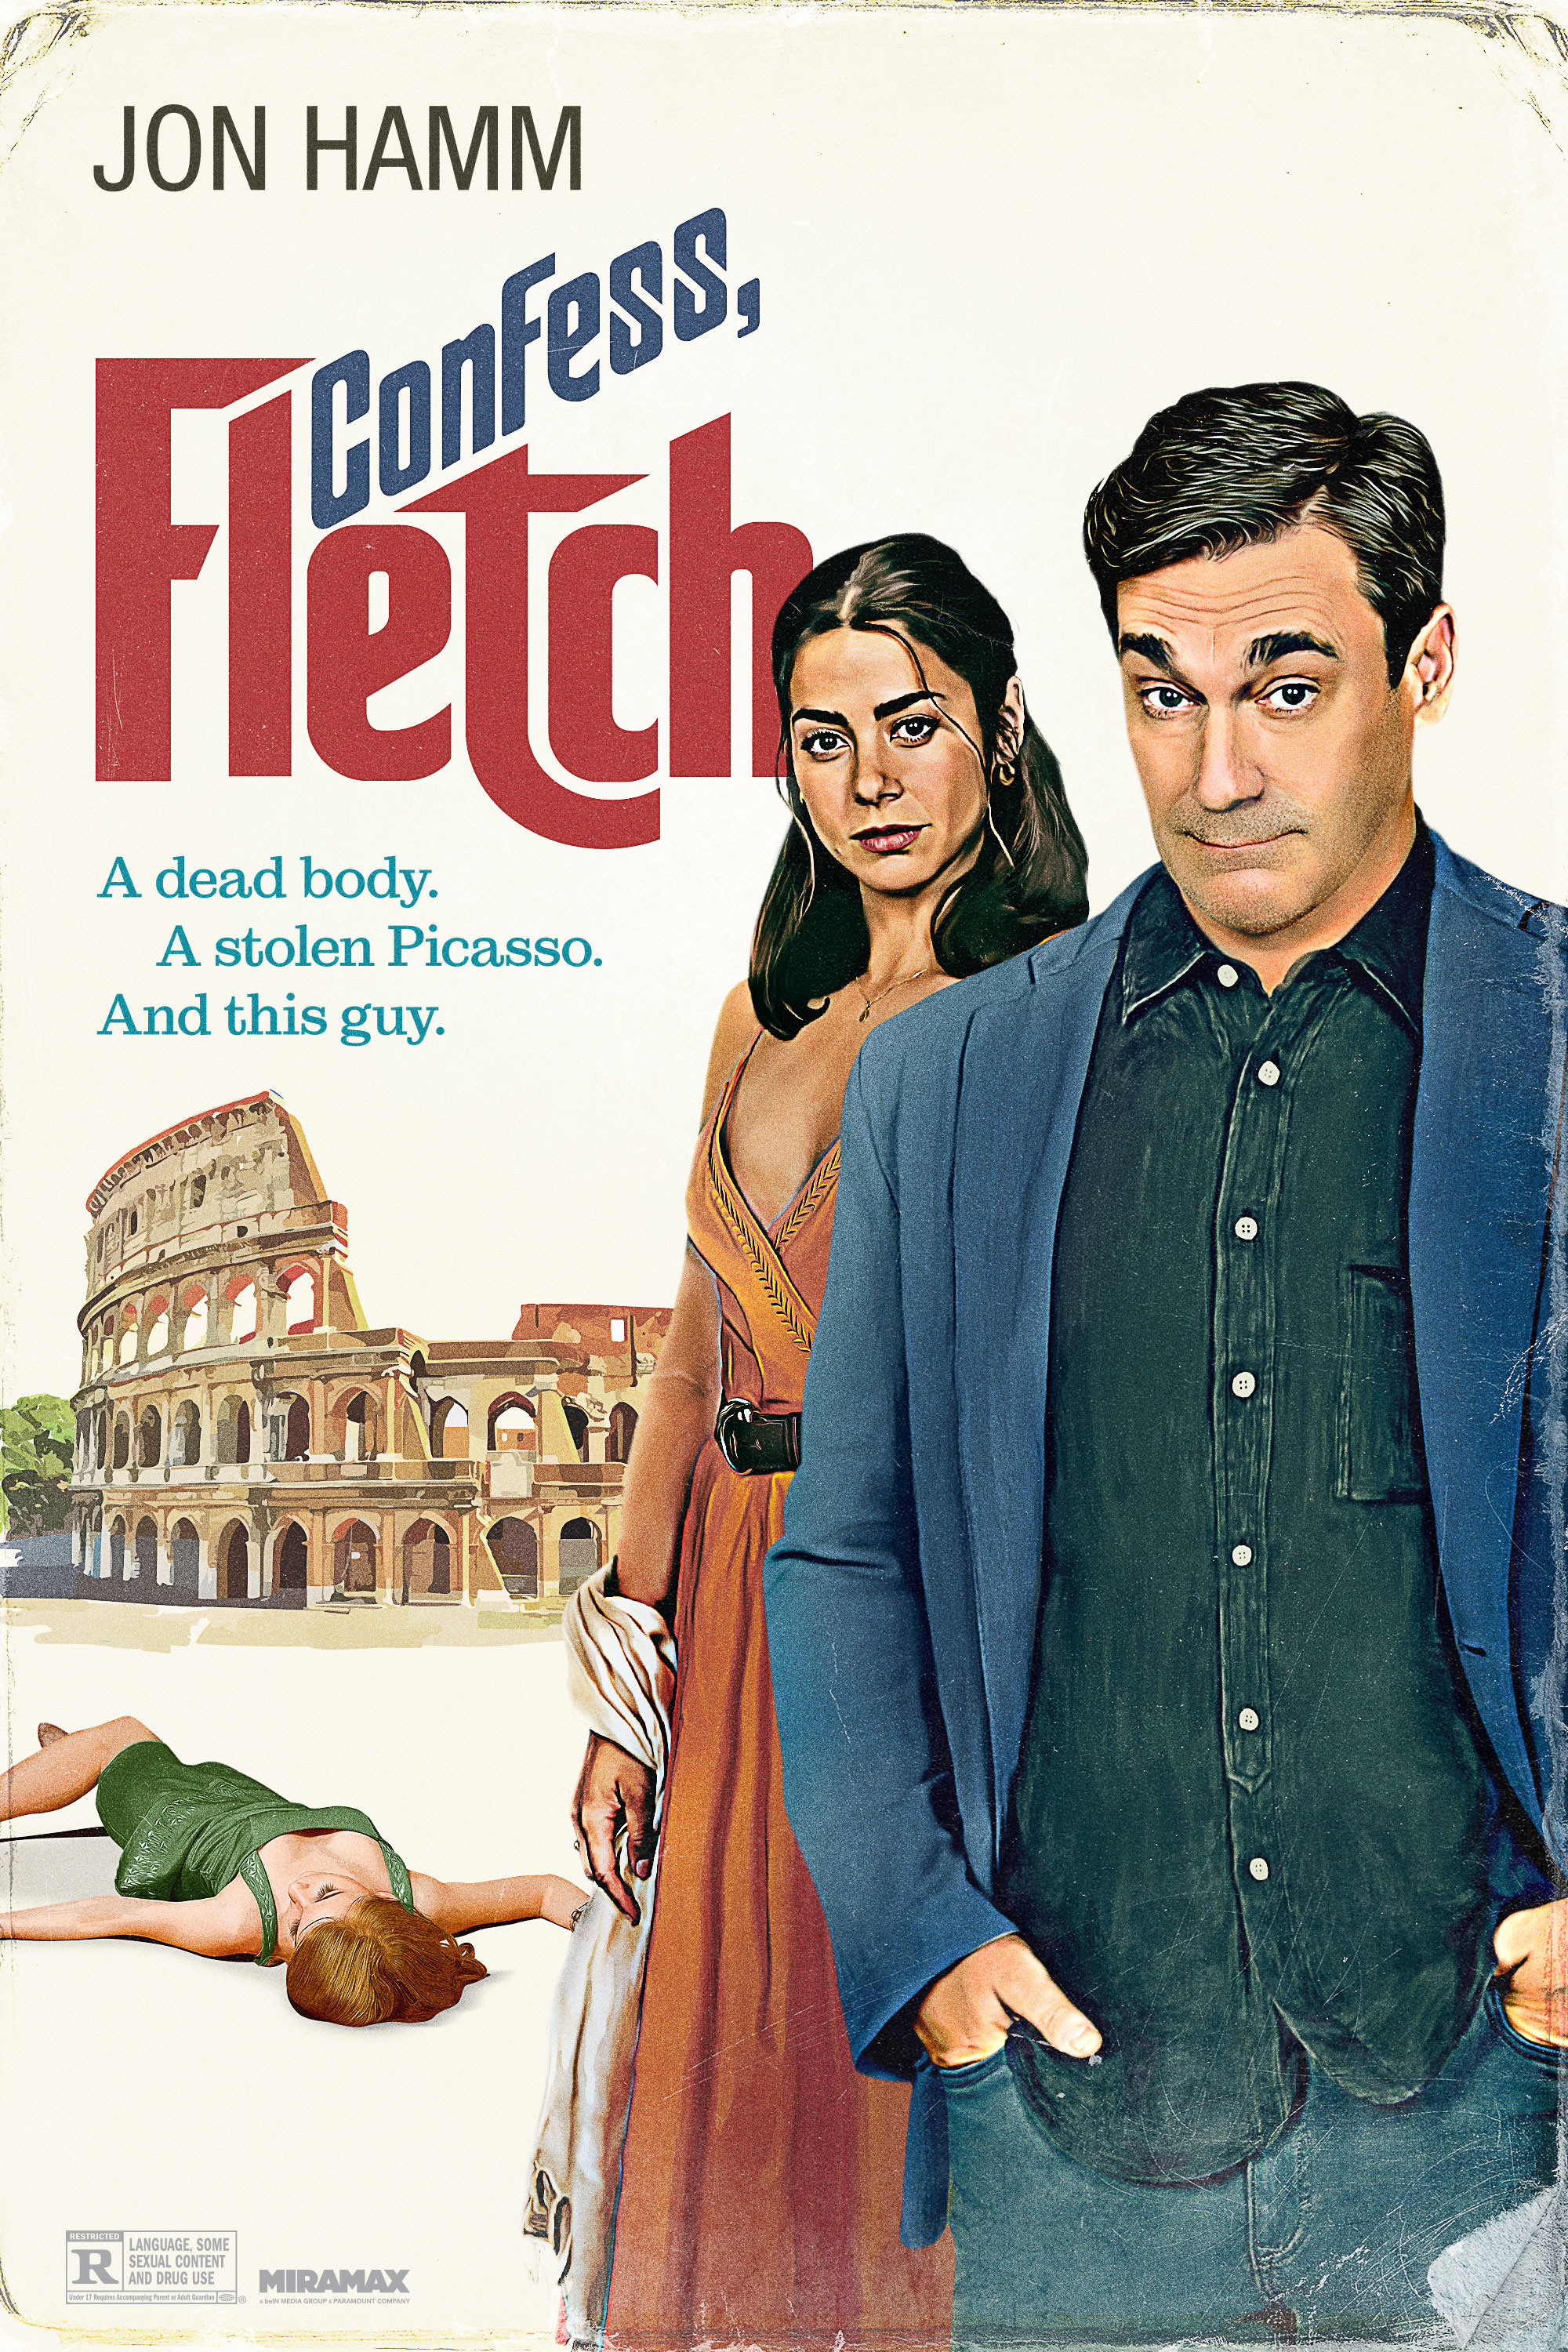 Cover Art for "Confess, Fletch"